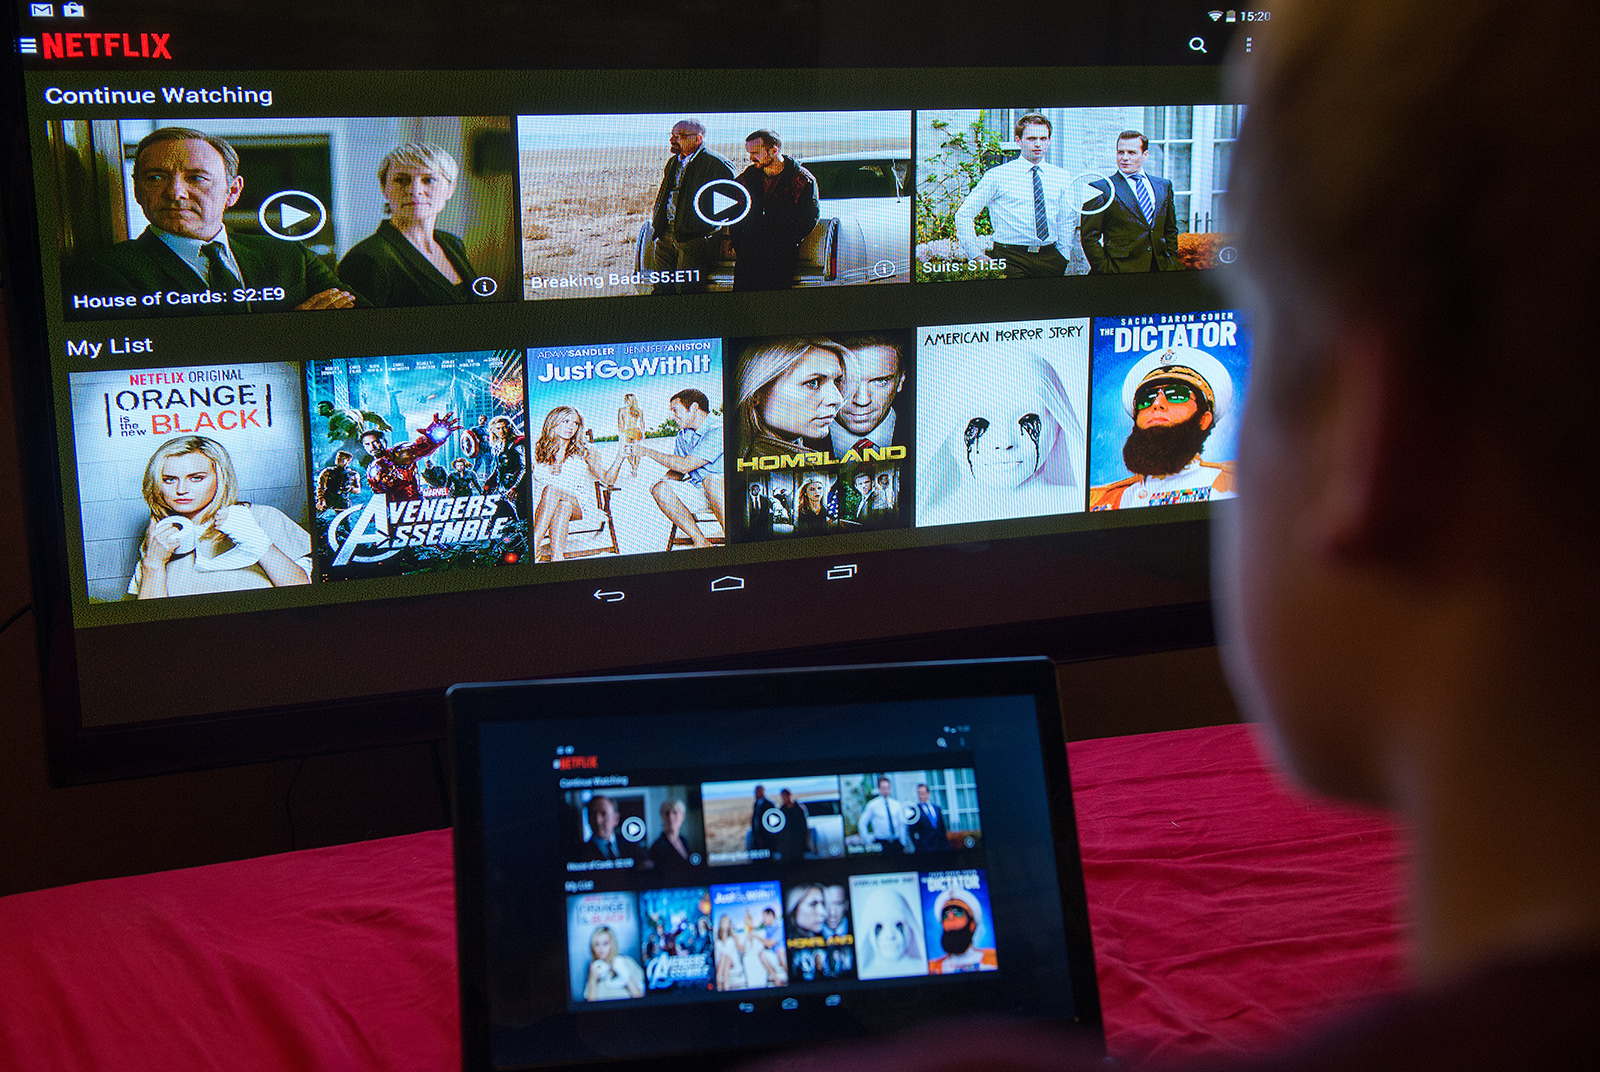 Cancel Netflix and use these 10 best free streaming apps for movies and shows